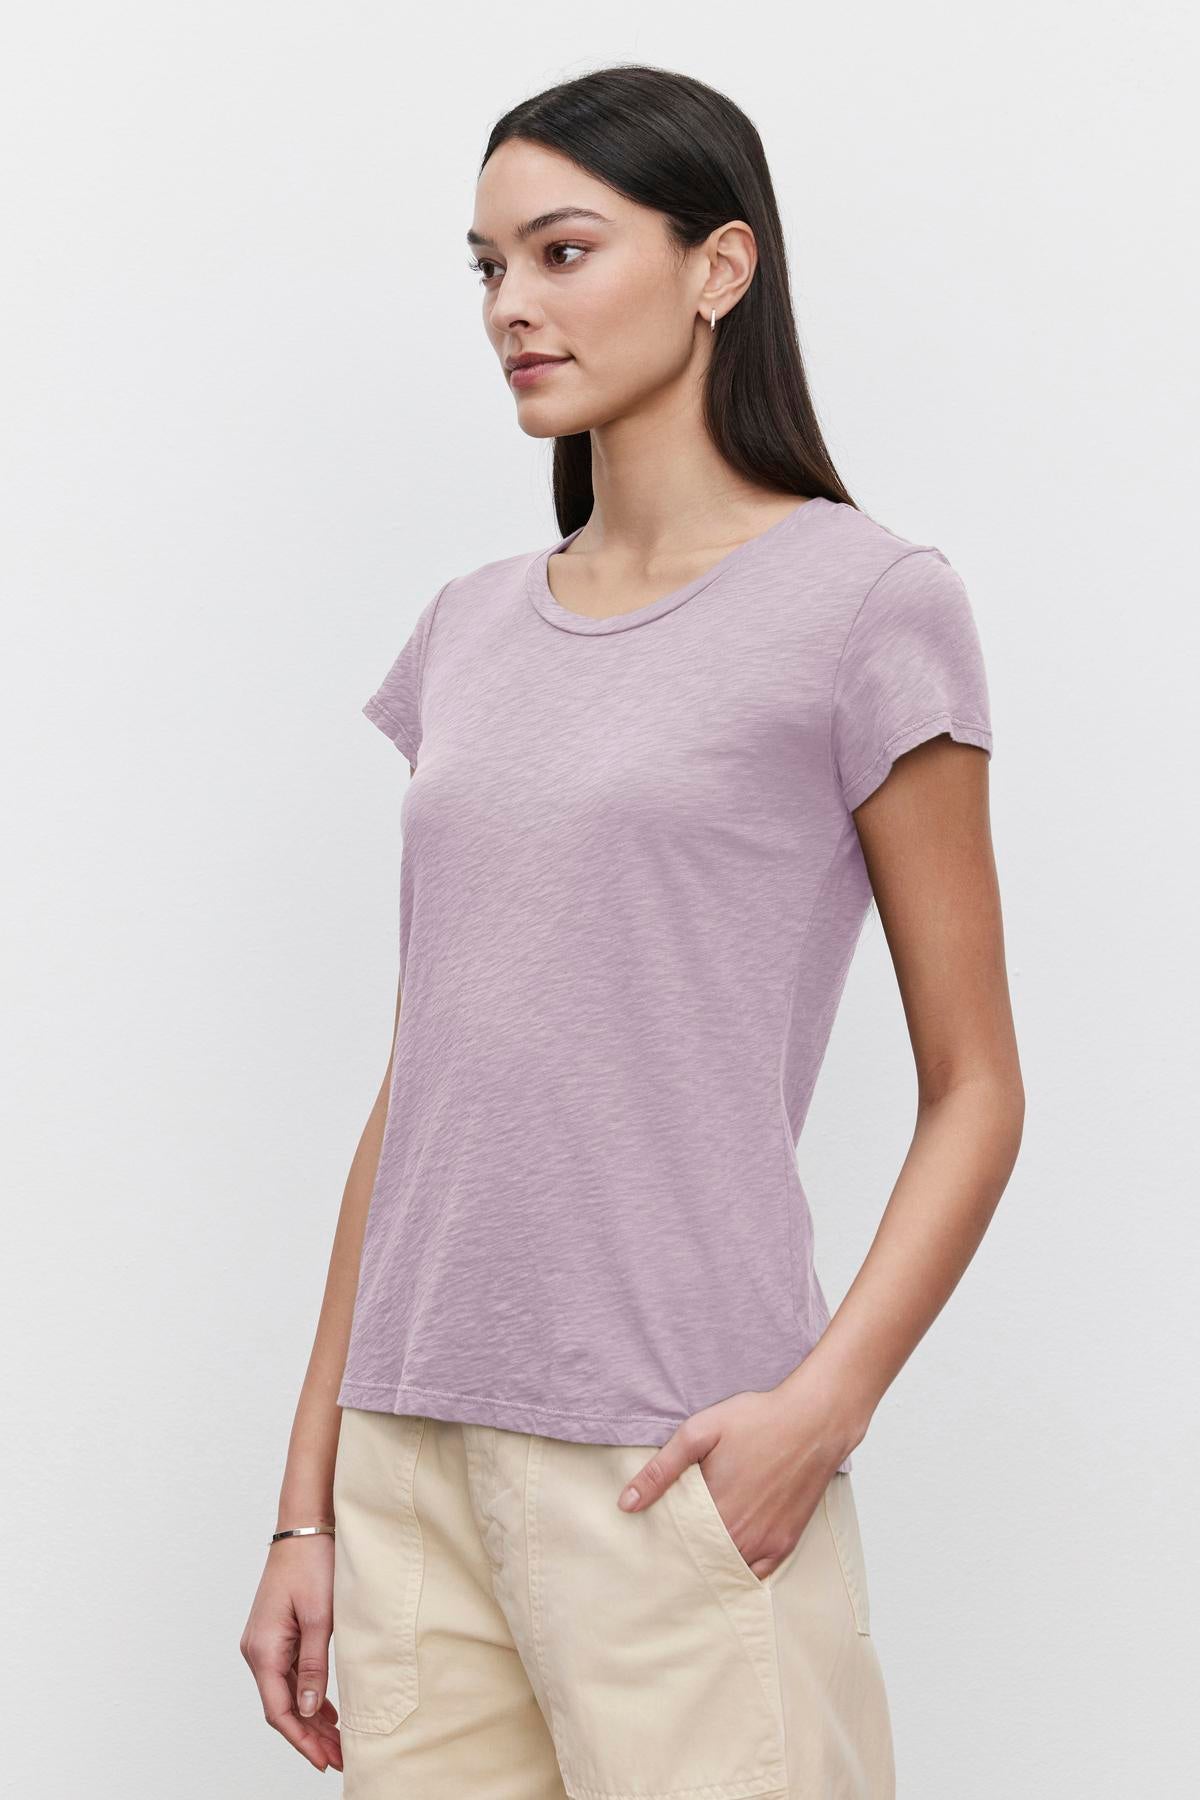 A person with long dark hair, wearing a short-sleeved lavender ODELIA TEE by Velvet by Graham & Spencer with a classic crew neckline and beige pants, stands against a plain white background.-37249868562625